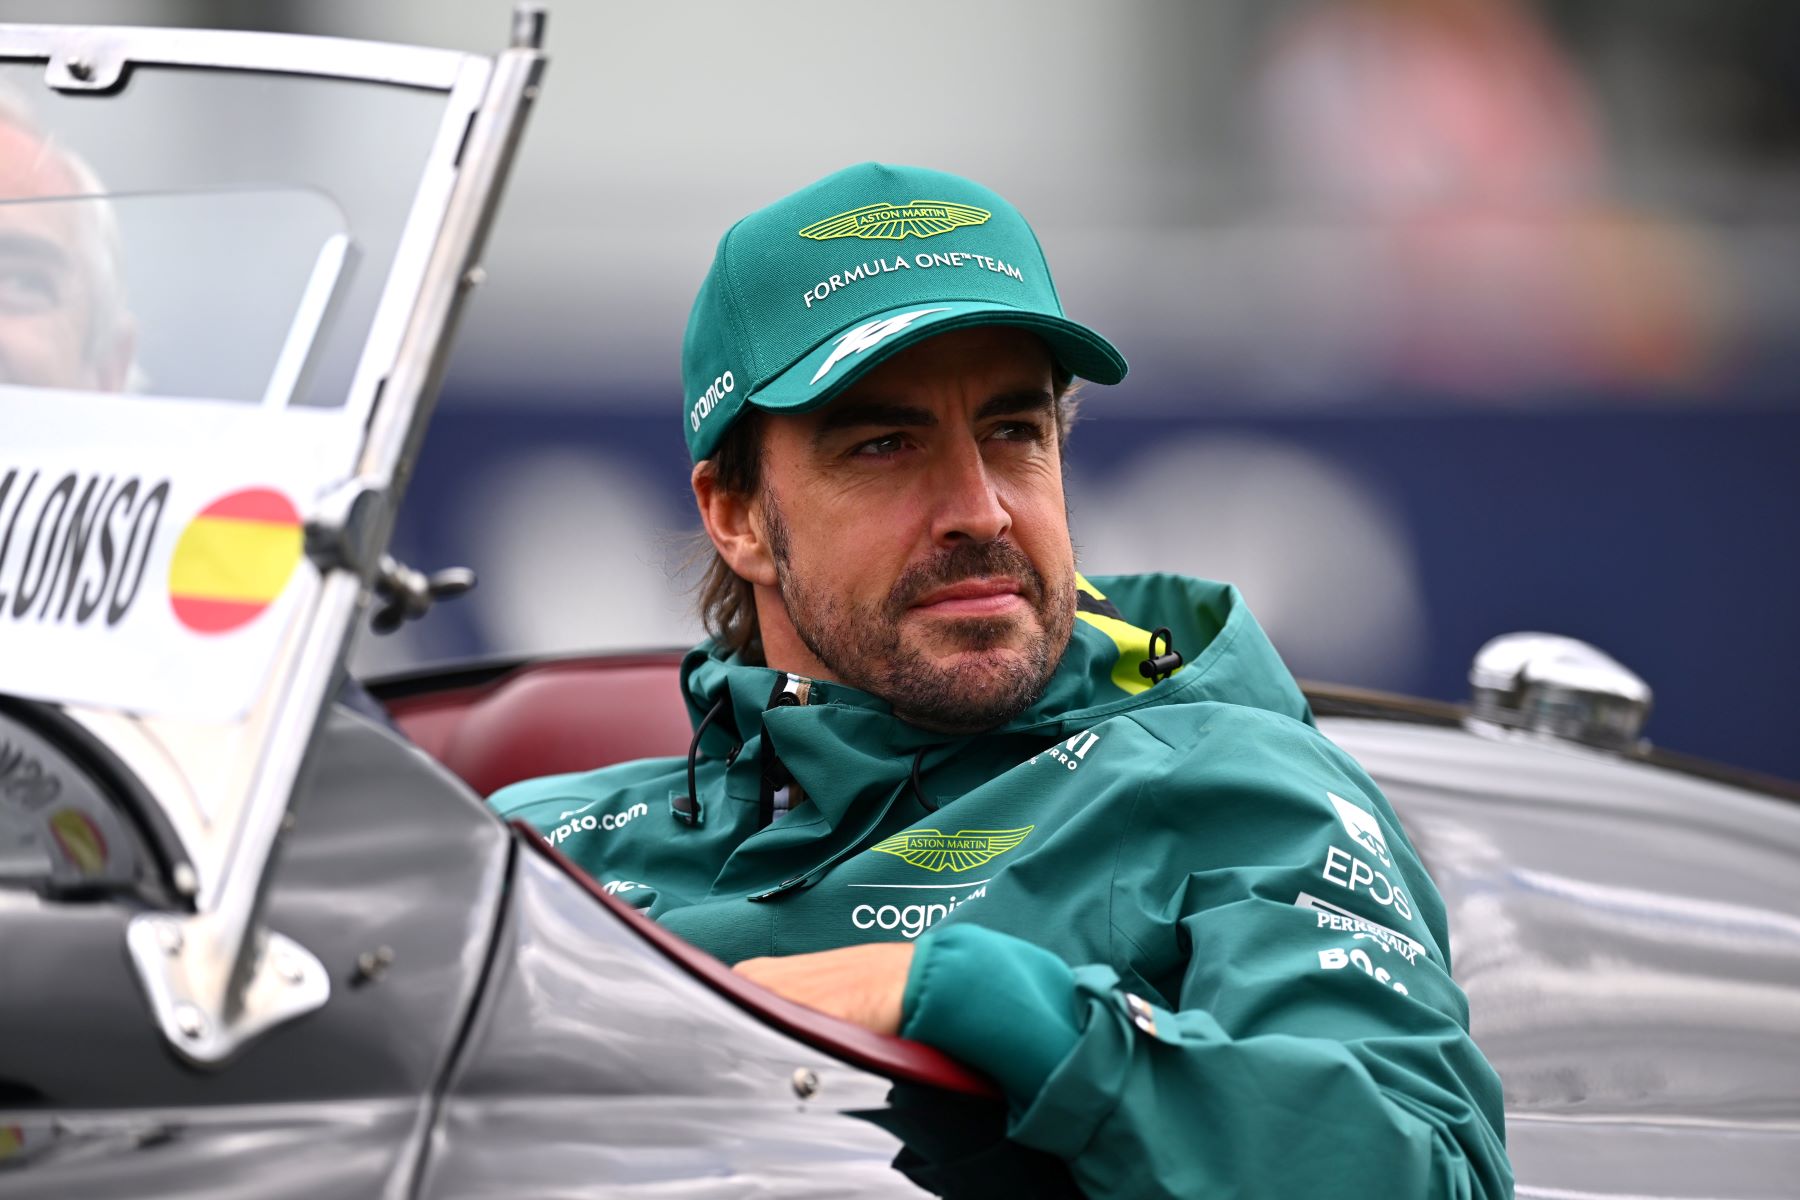 15 Extraordinary Facts About Fernando Alonso 